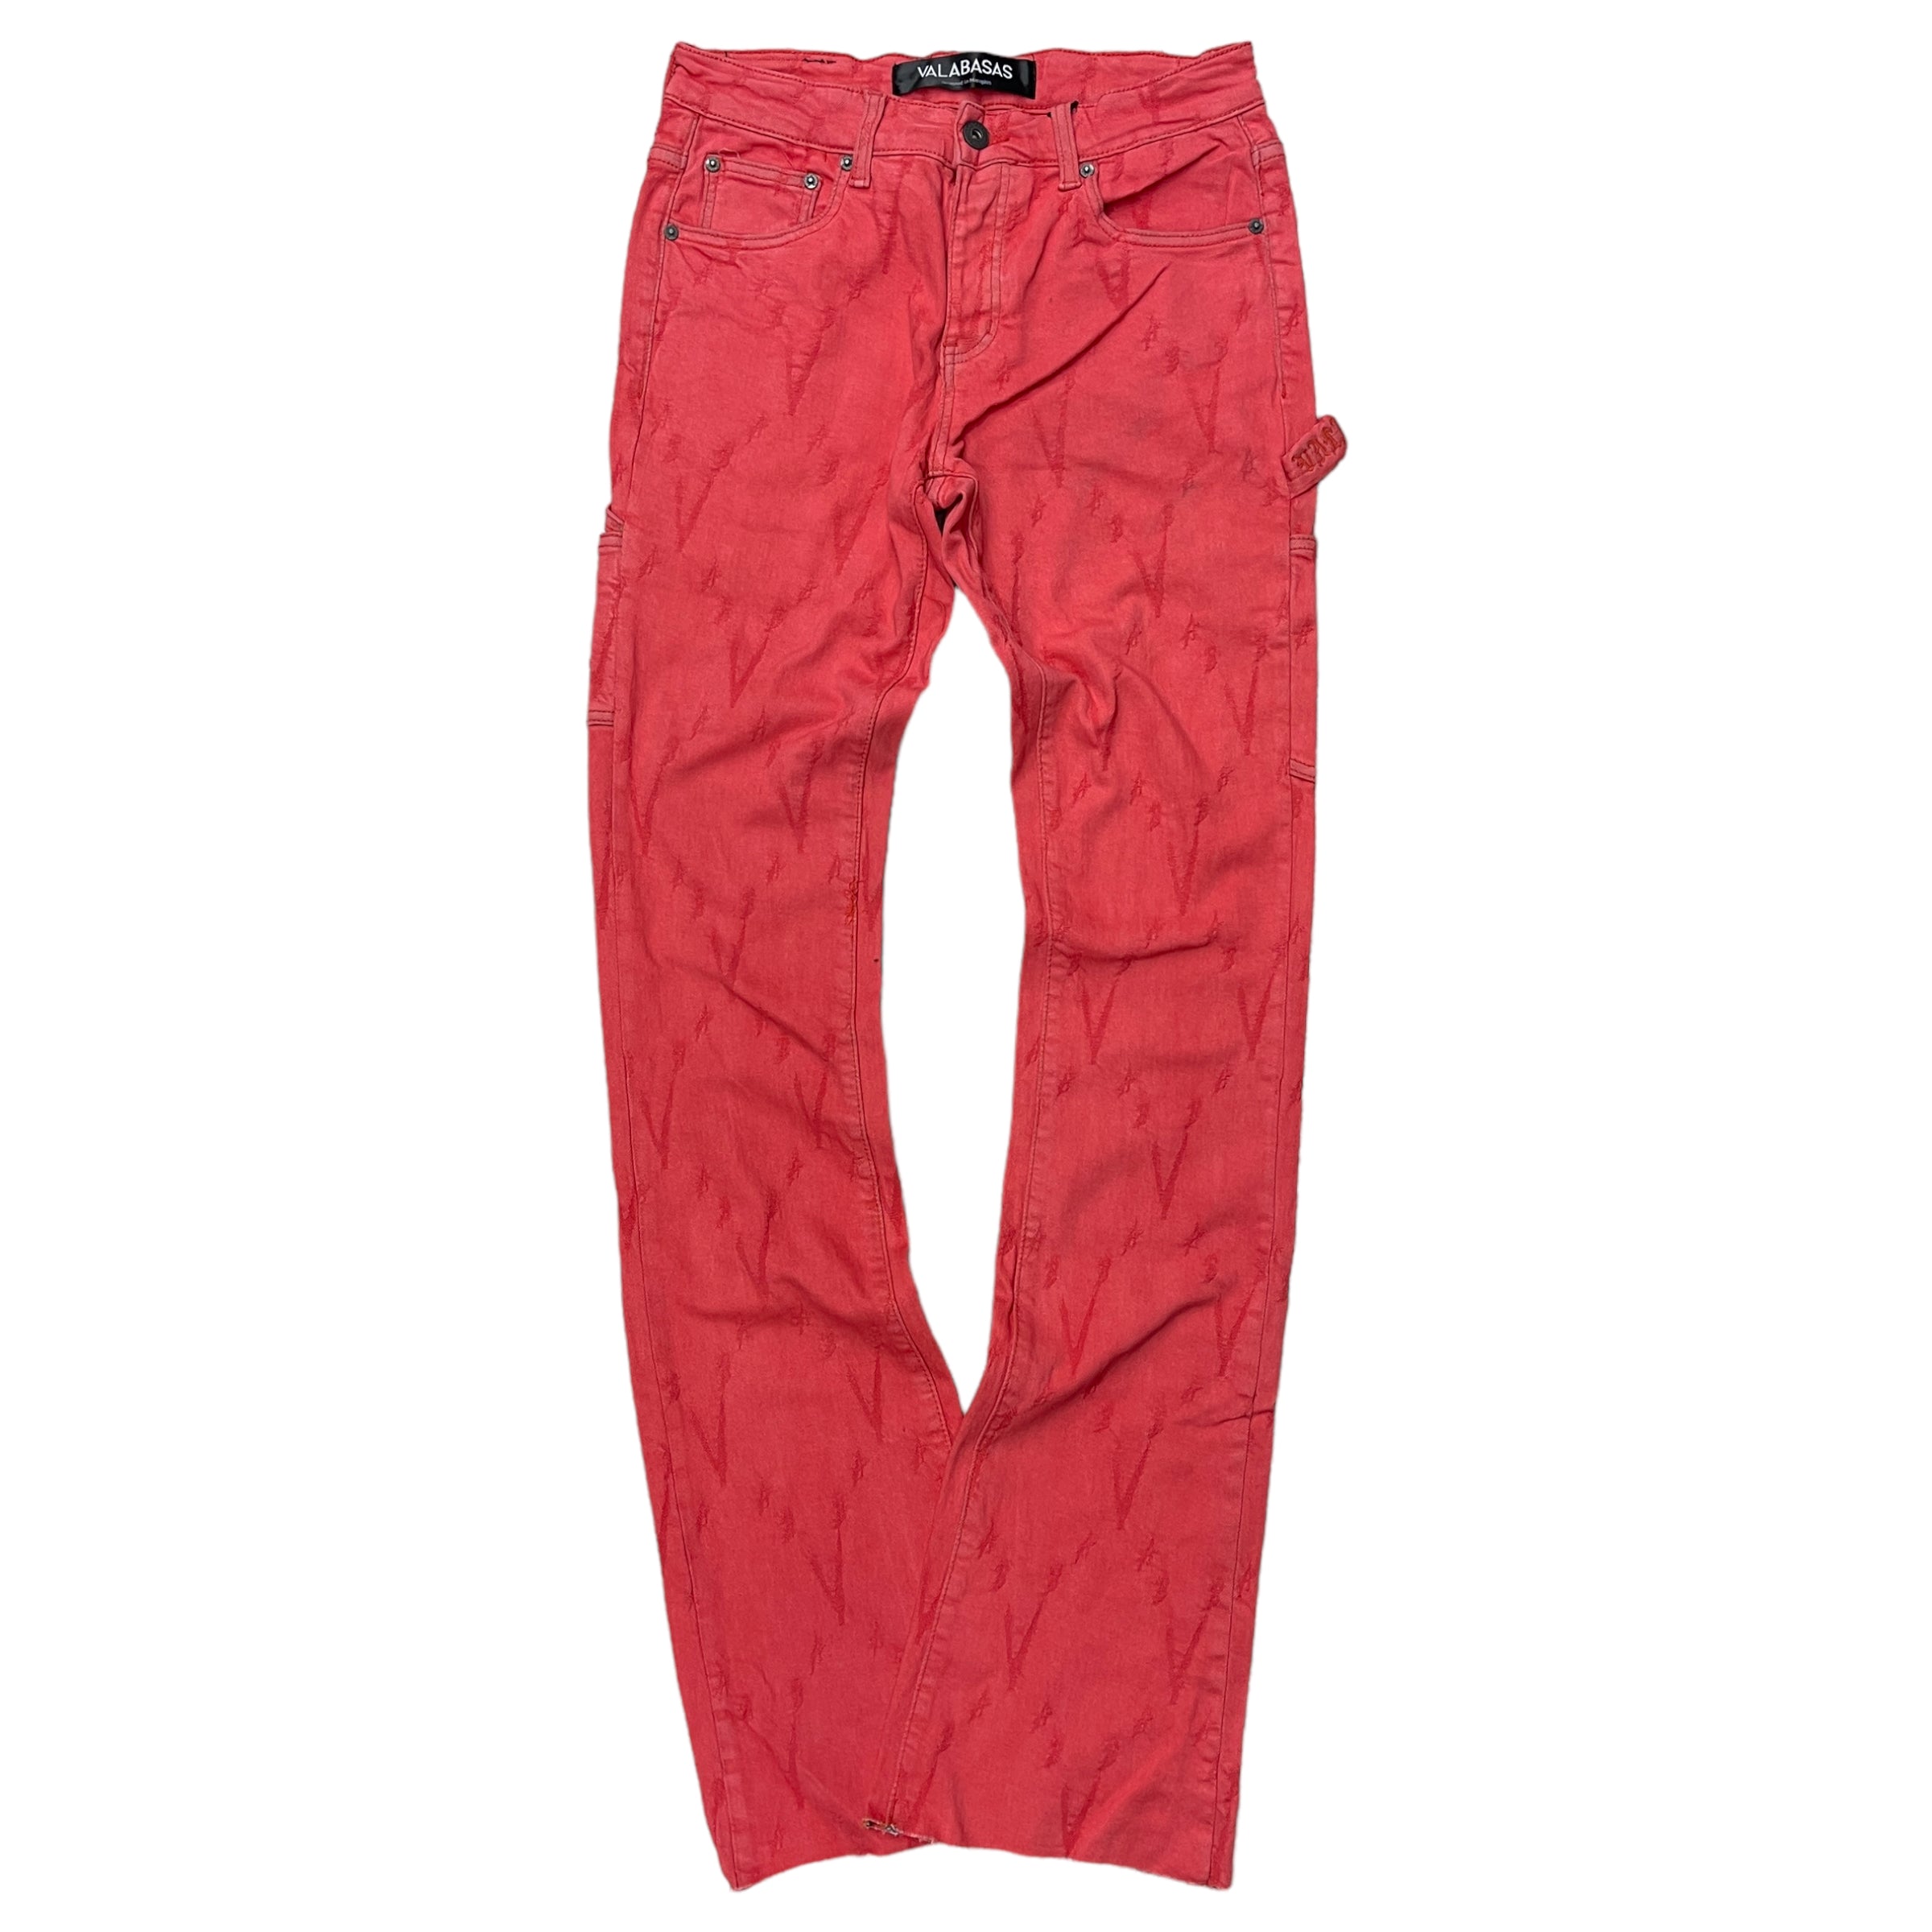 Valabasas “Apex” Stacked Flare Jeans Pink/Red (T)